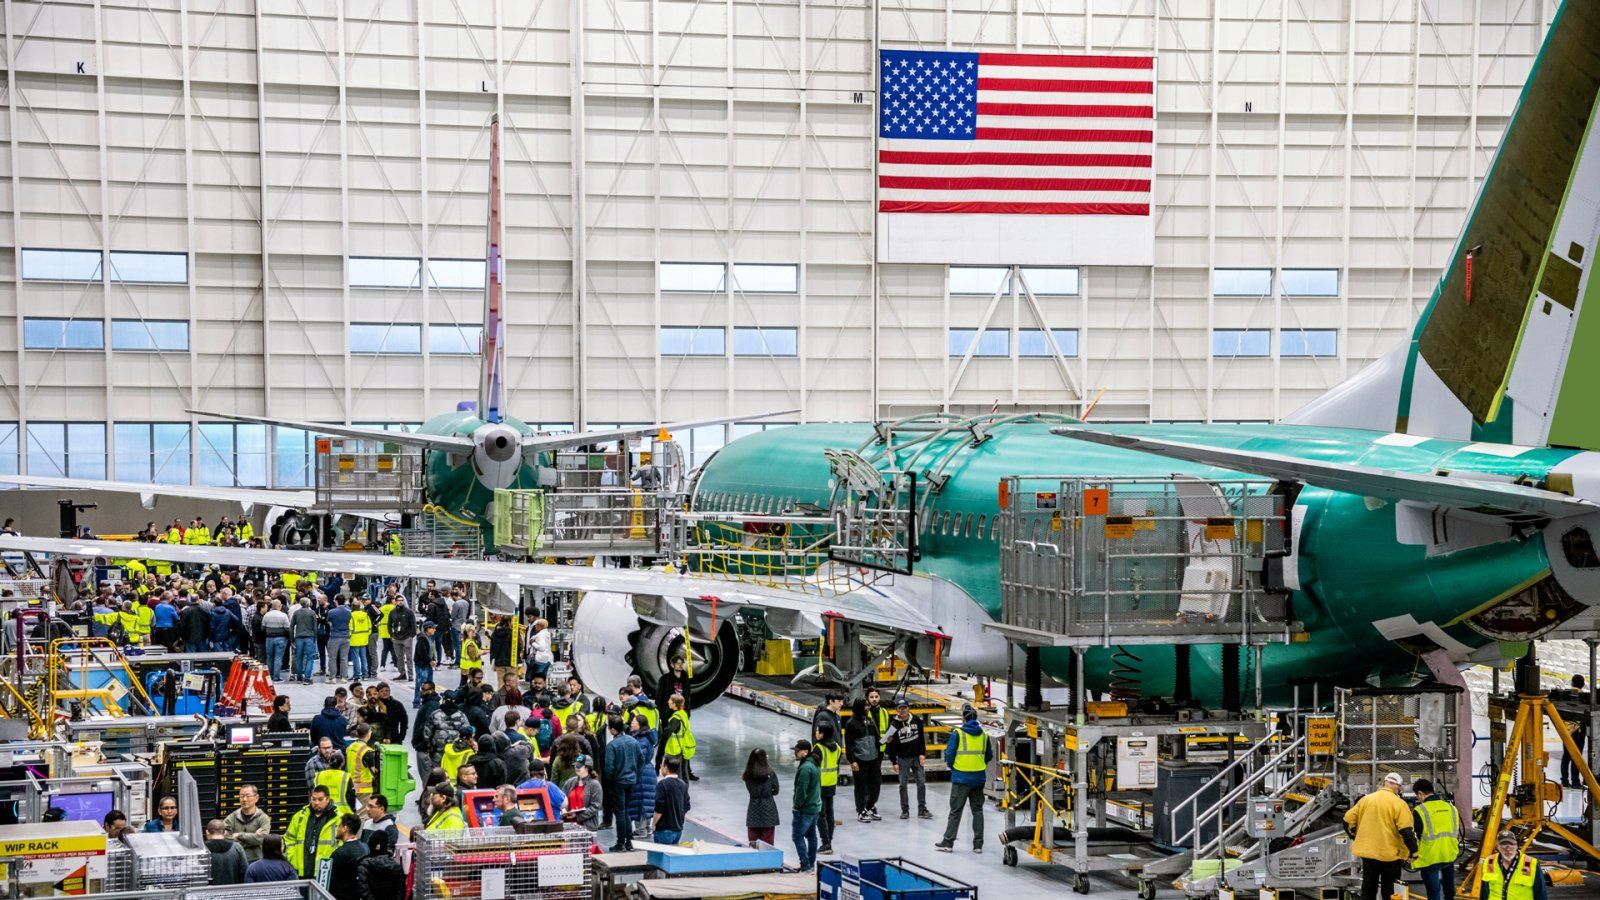 Quality Stand Down day at Renton, US, where Boeing produces the 737 MAX